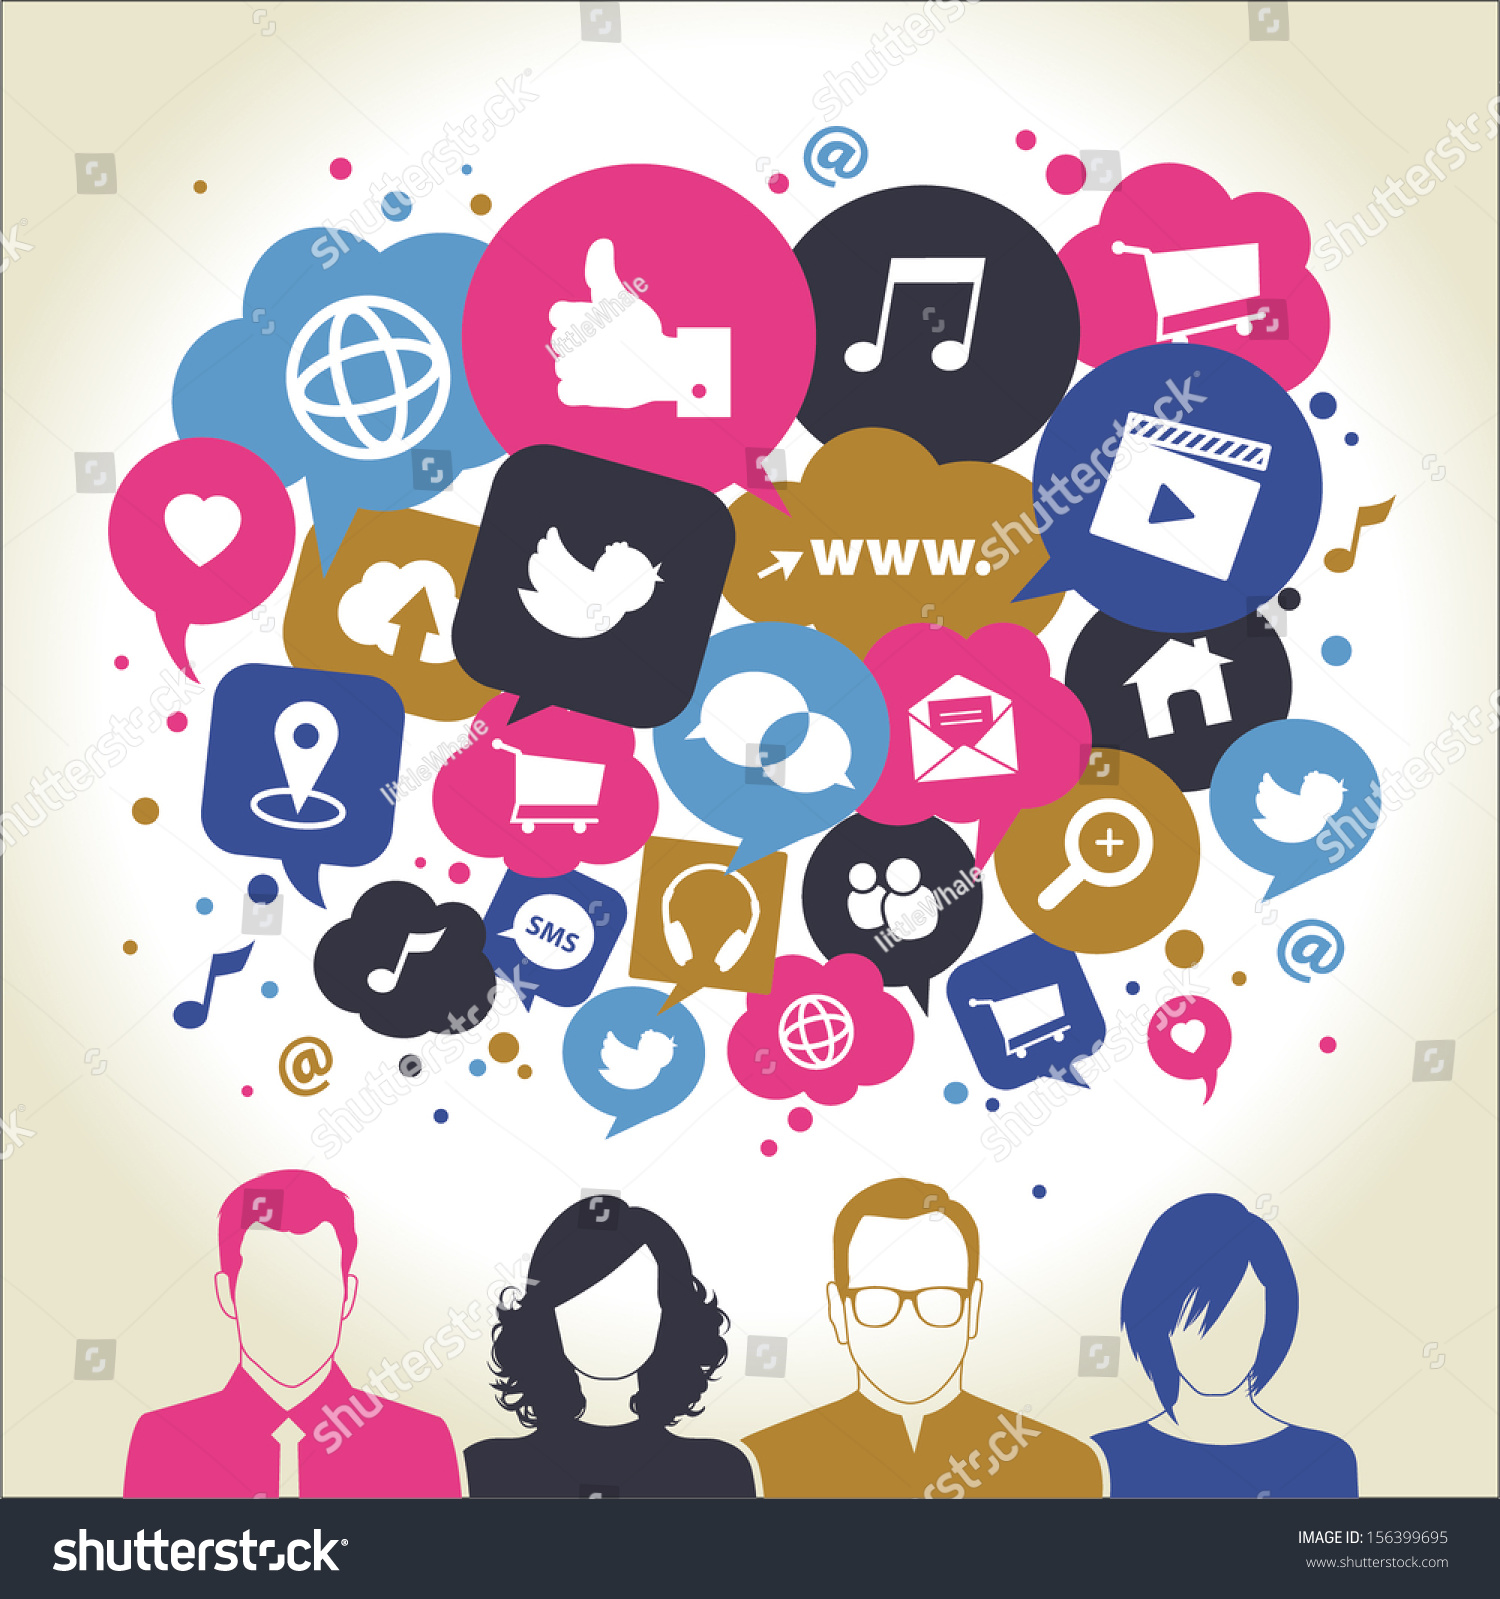 Social media icons in speech bubbles with group of people #156399695